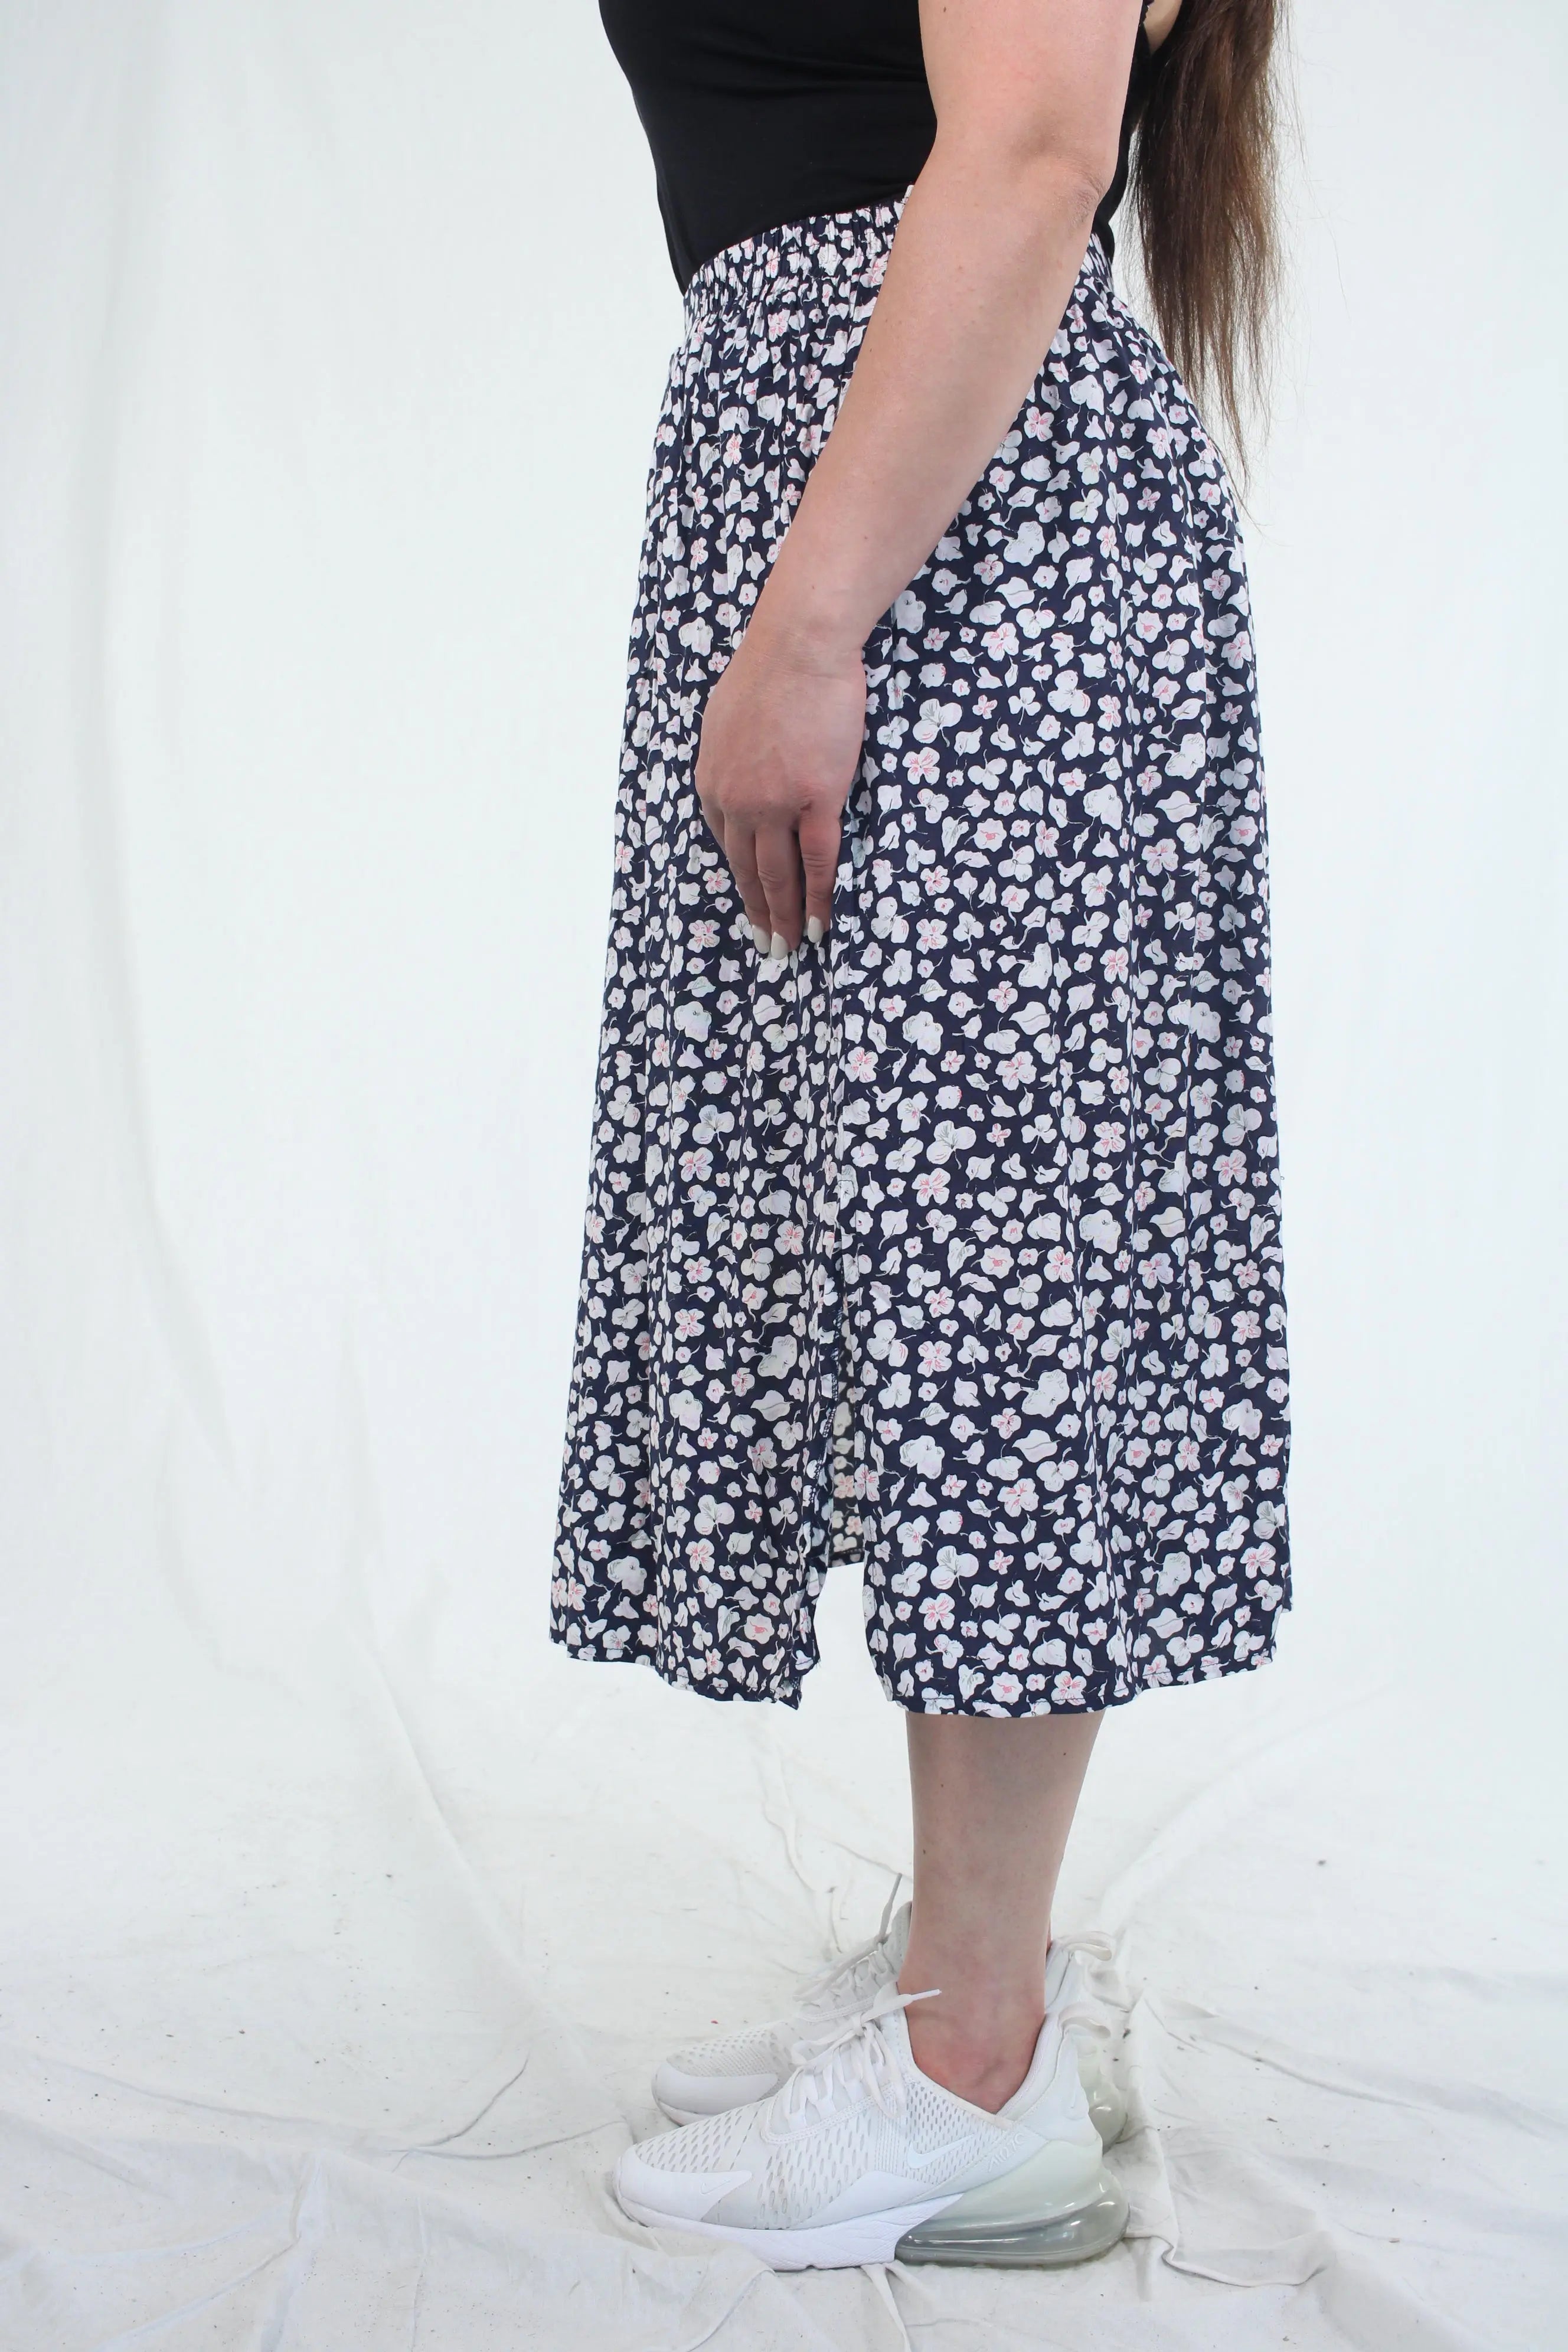 Unknown - Vintage Floral Skirt- ThriftTale.com - Vintage and second handclothing